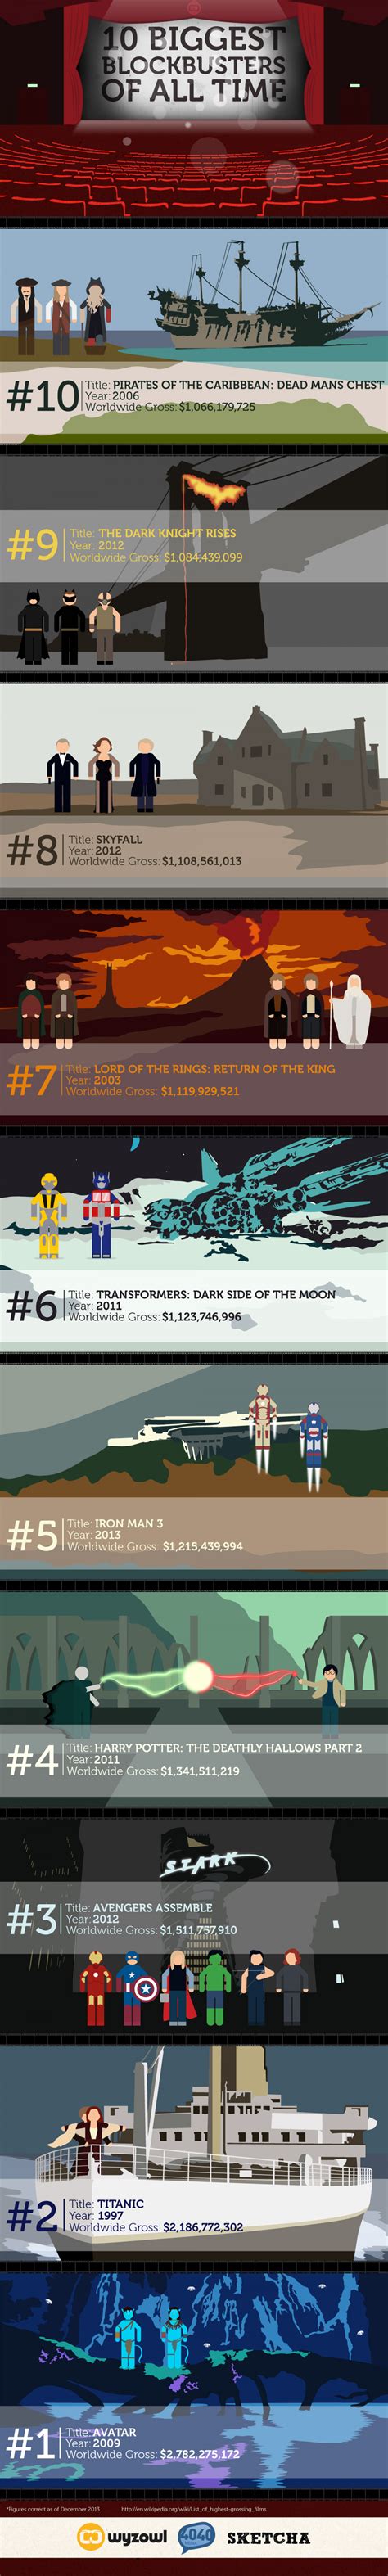 Top 10 Highest Grossing Films Of All Time | Visual.ly